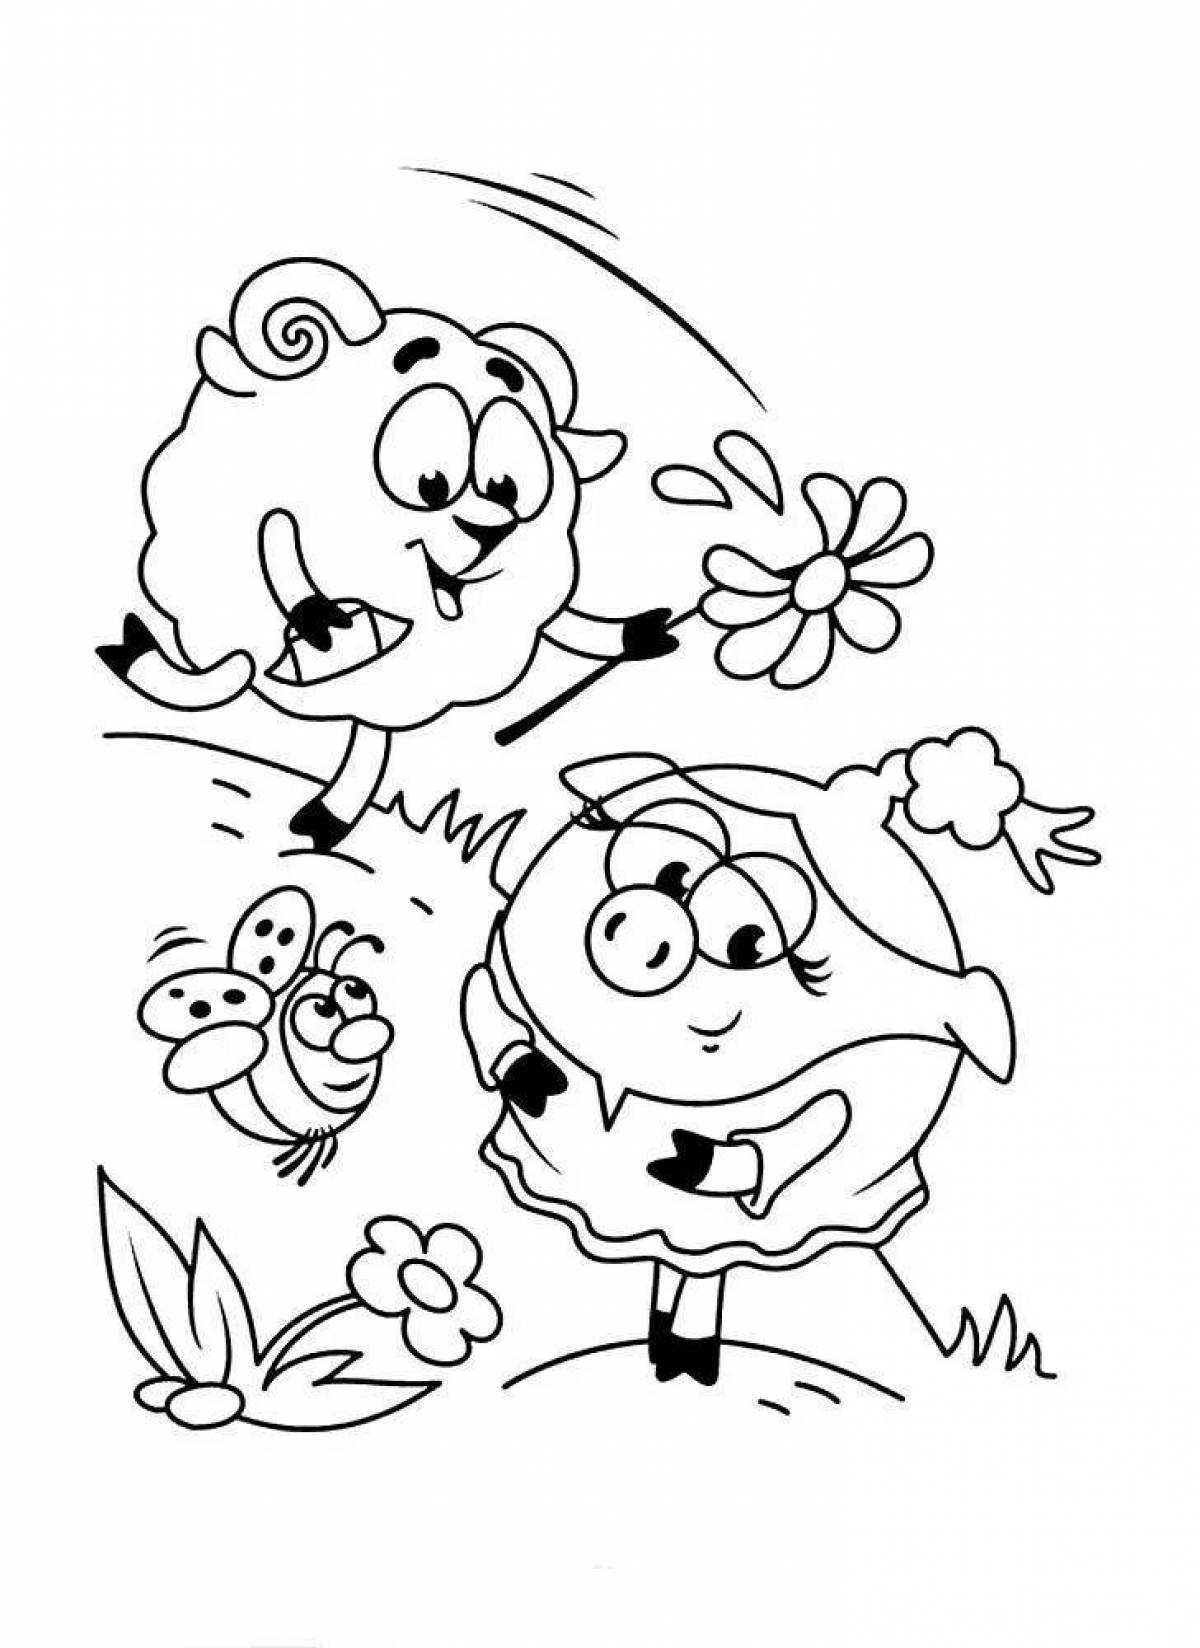 Sweet crunch coloring page